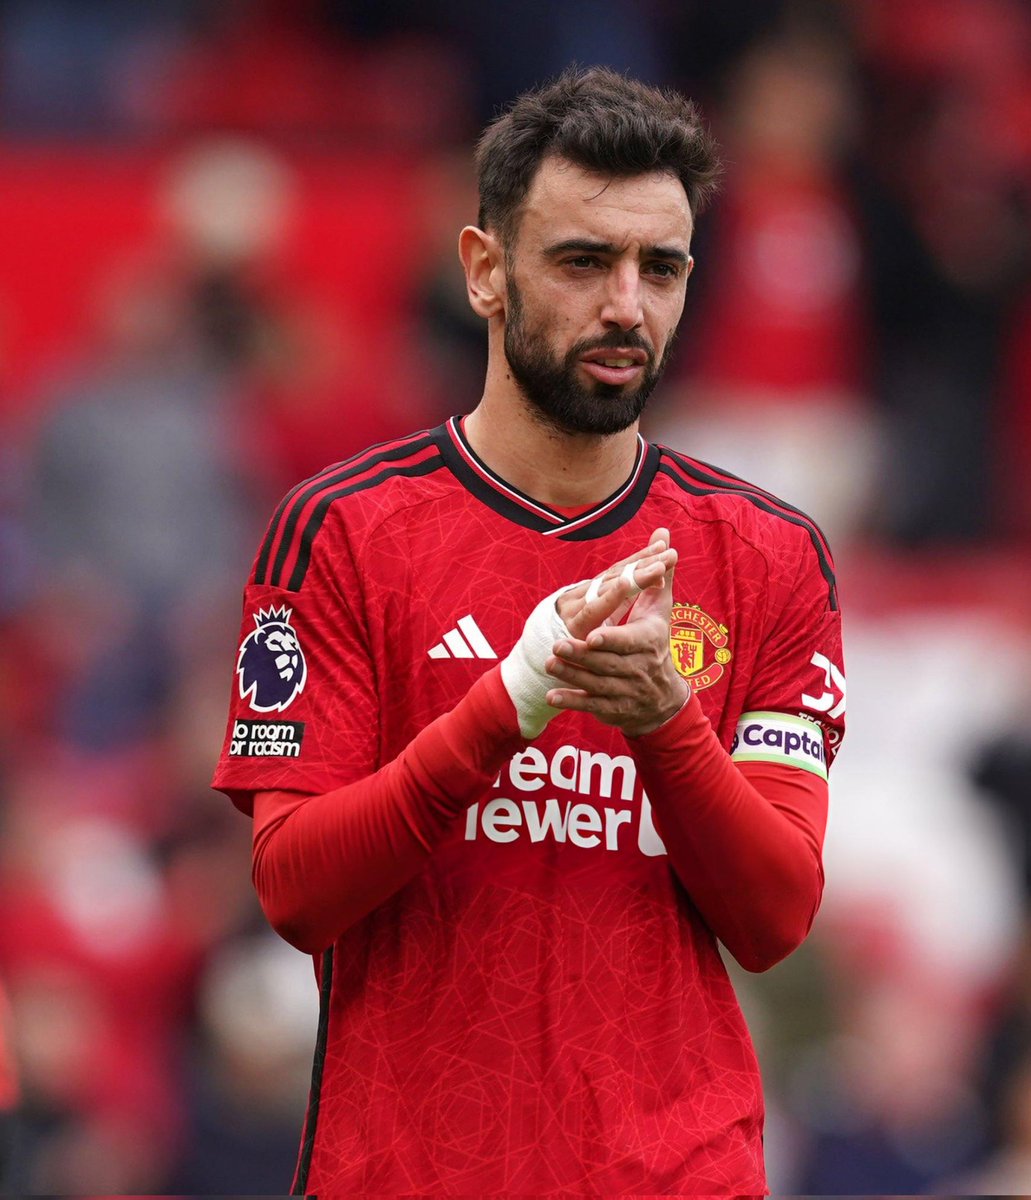 ℹ️ Bruno Fernandes misses out of Man United's squad to the Selhurst Park for Crystal Palace clash tonight.

• It is only the second game he'll miss due to injury/ sickness since moving to the club in January 2020, making 230 appearances across all competitions.

Mr. Reliable.